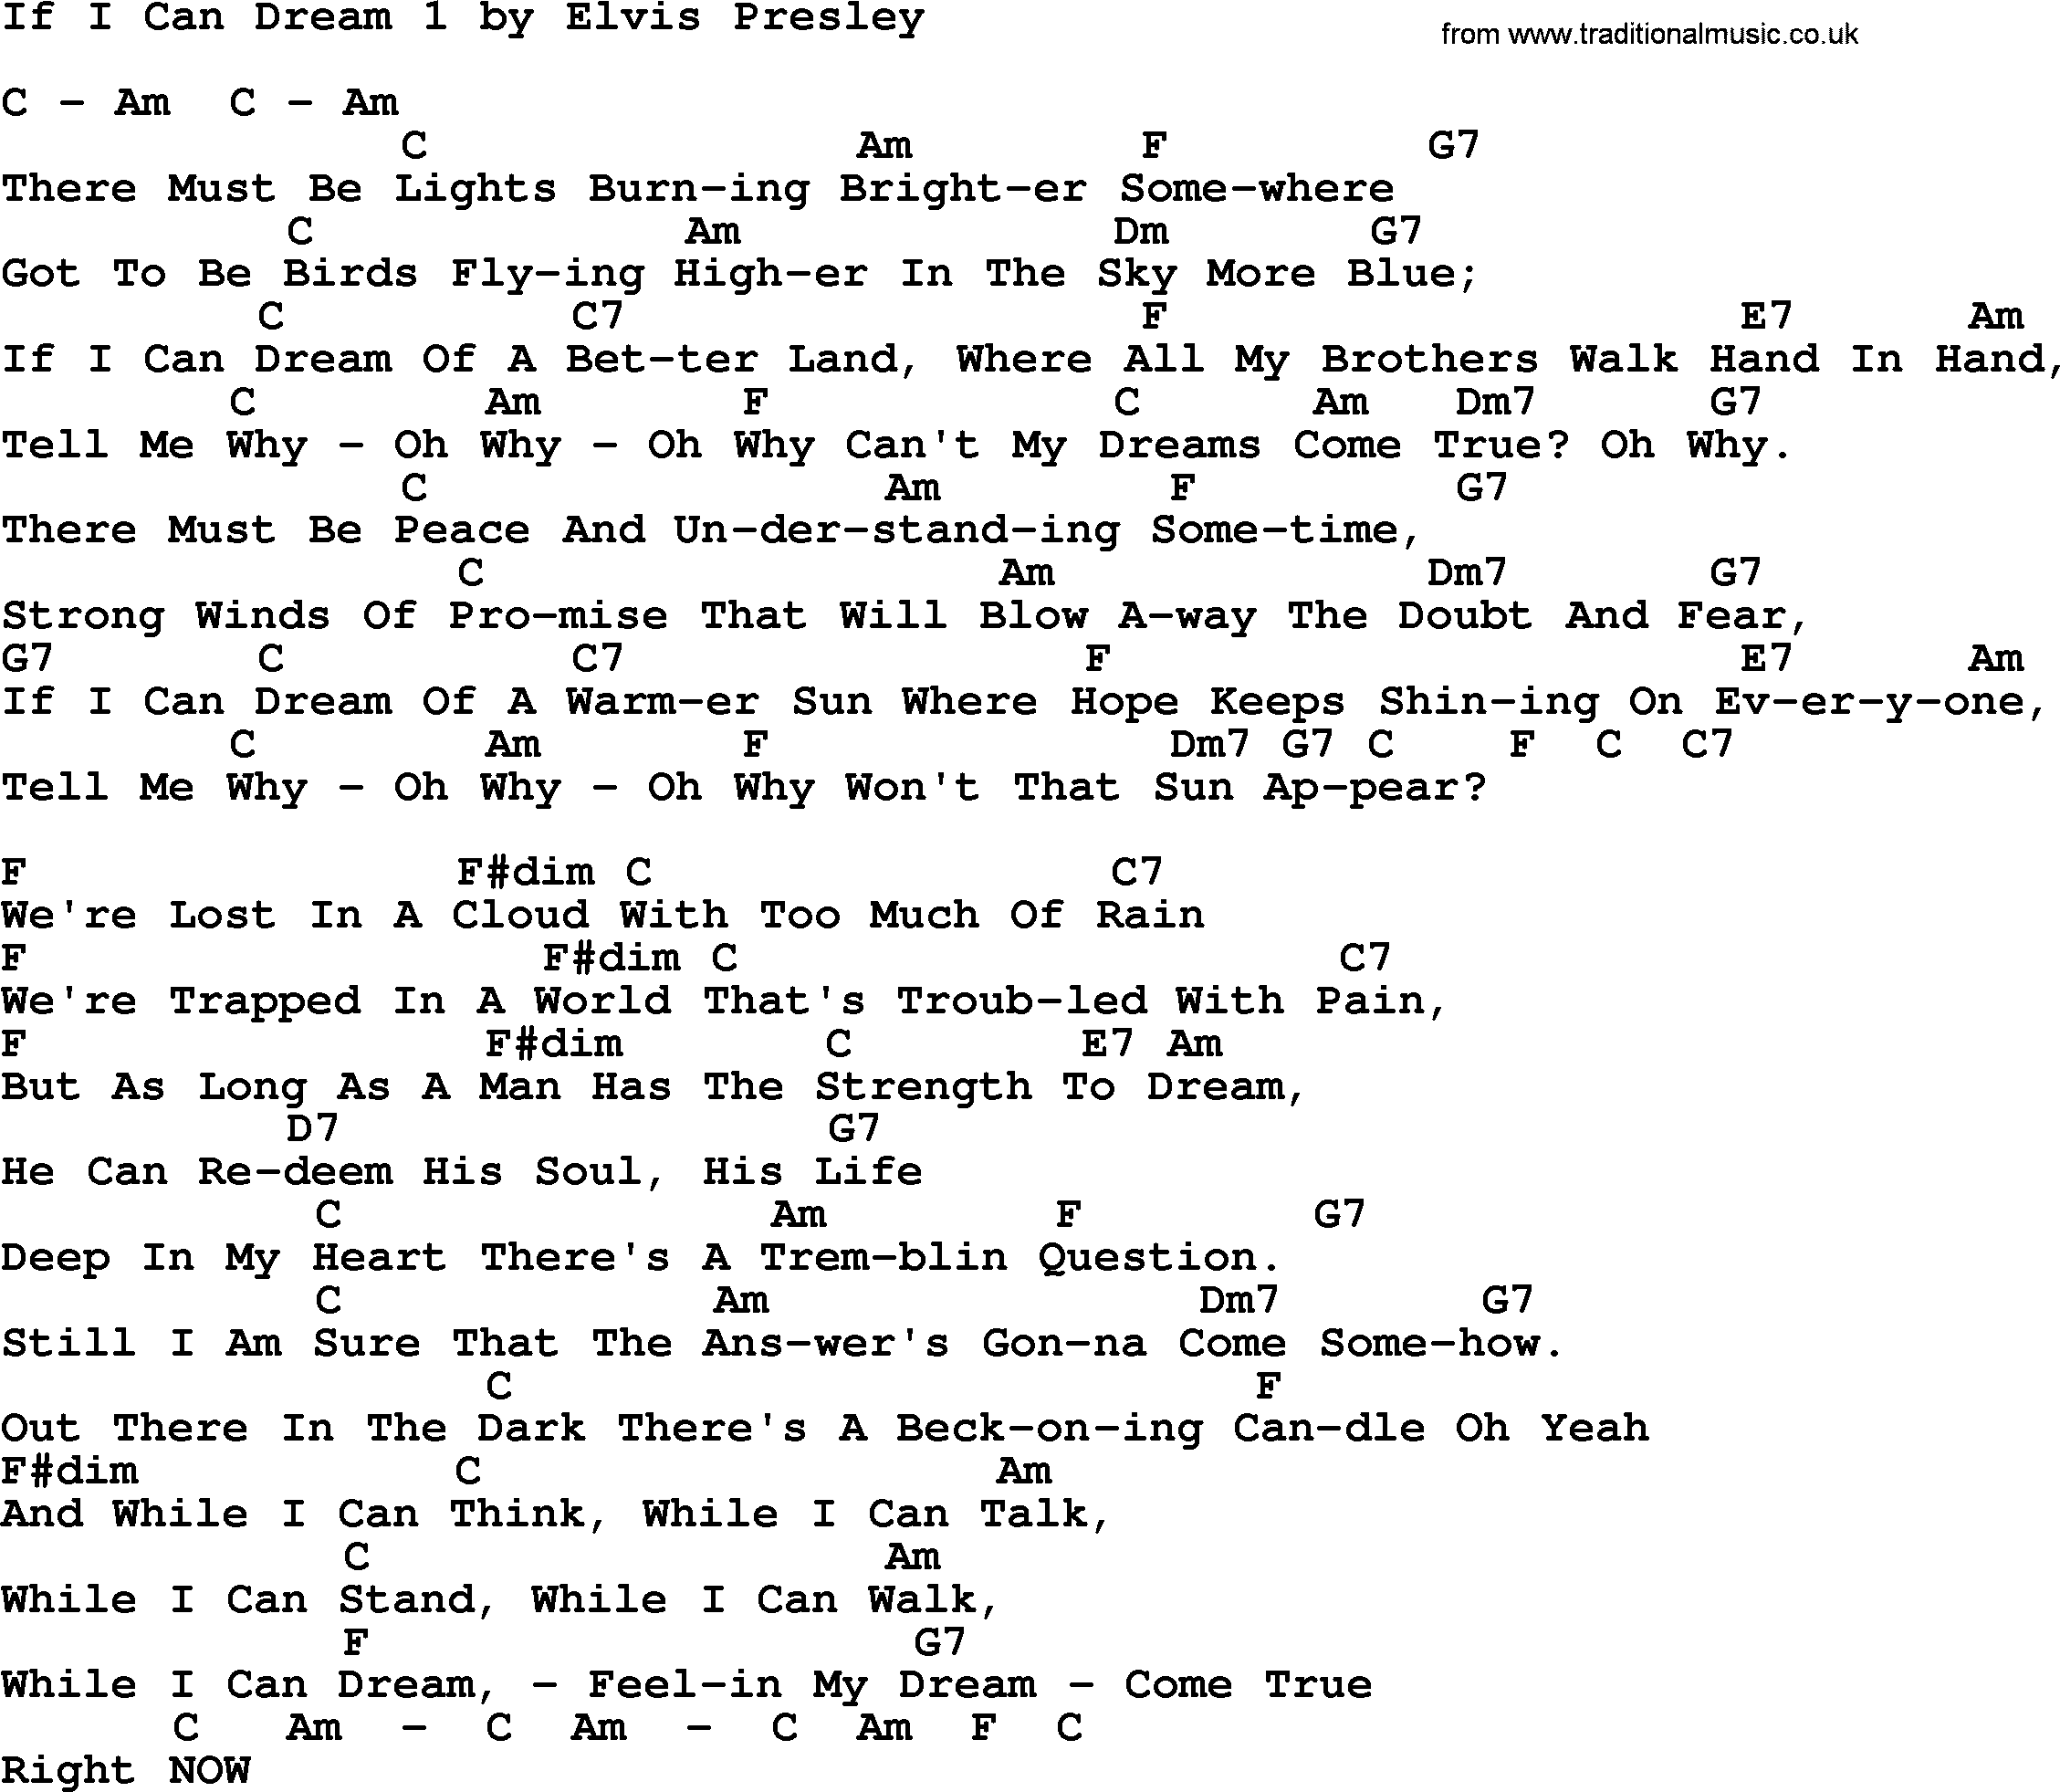 Elvis Presley song: If I Can Dream 1, lyrics and chords